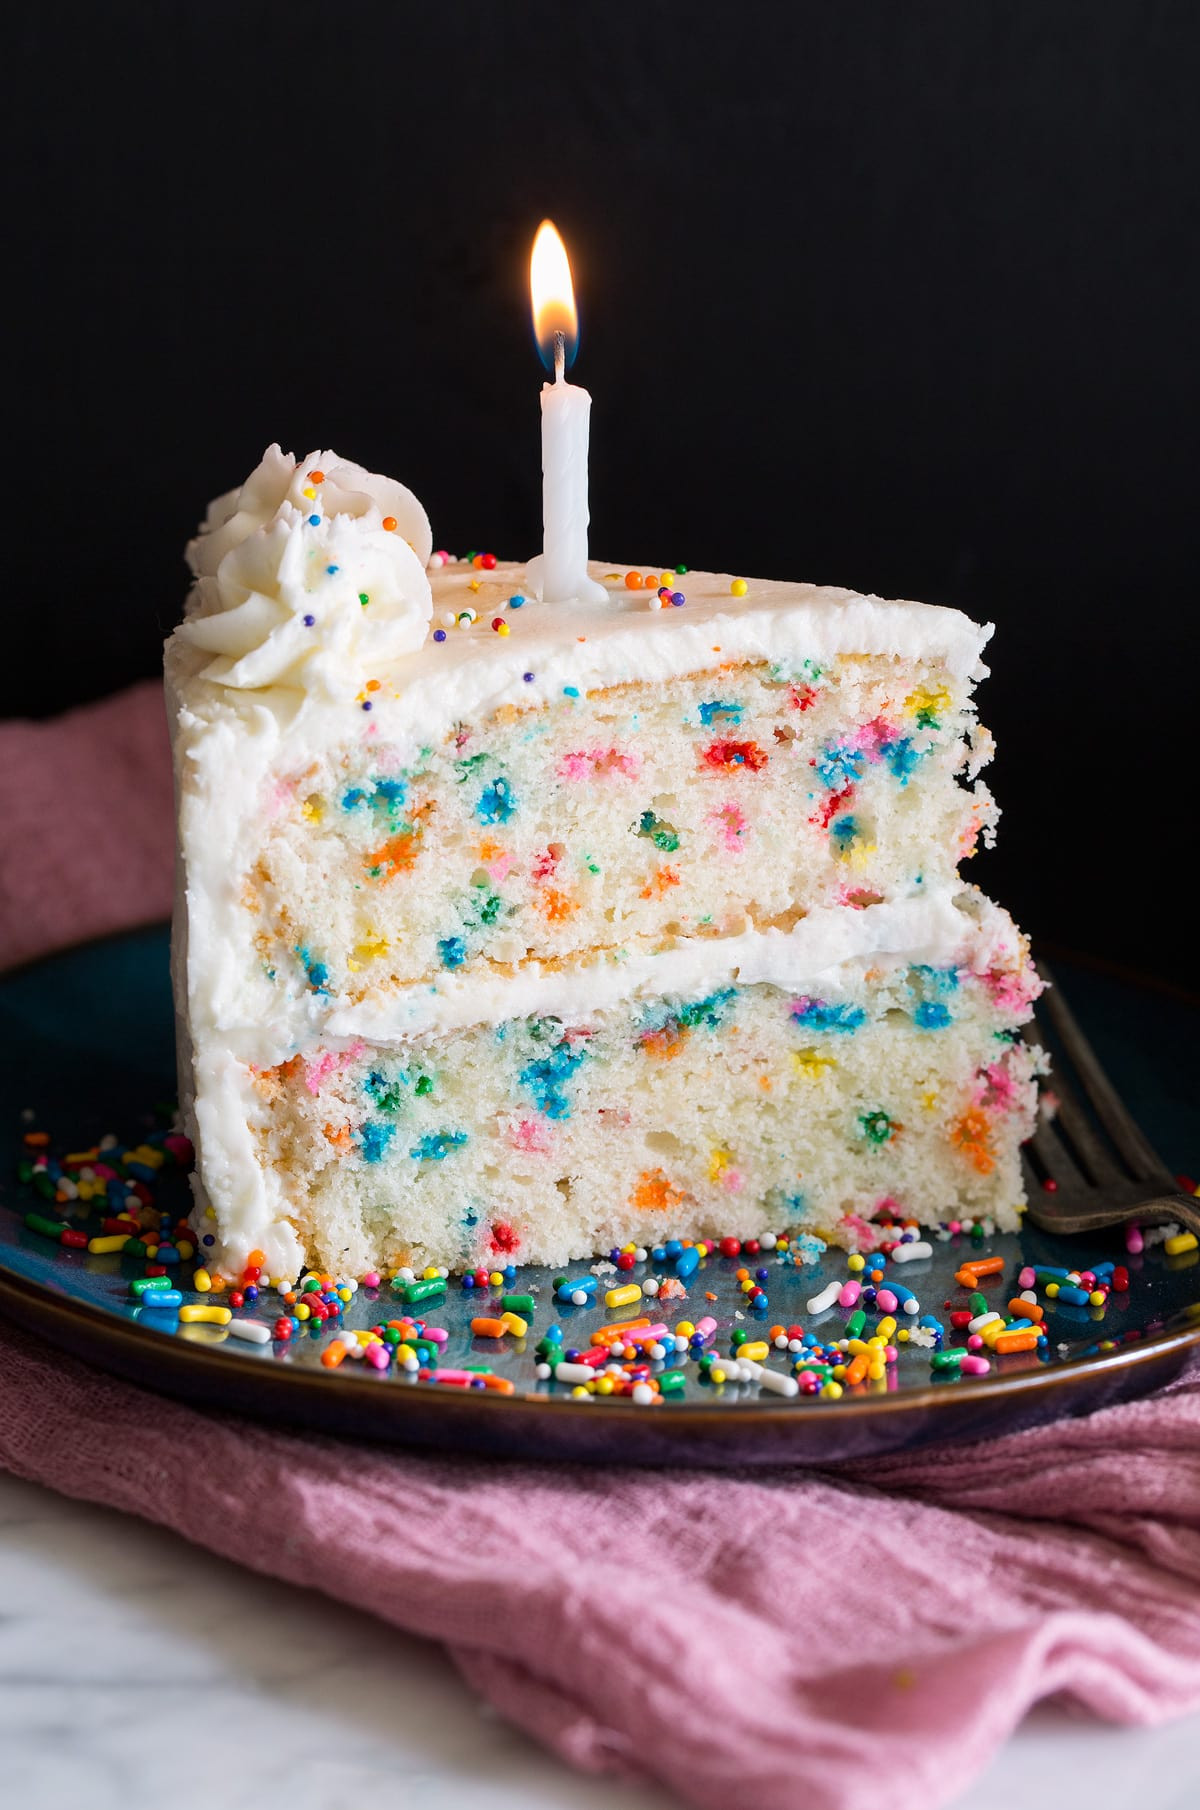 Pictures Of A Birthday Cake
 Best Birthday Cake Recipe Funfetti Cake Cooking Classy